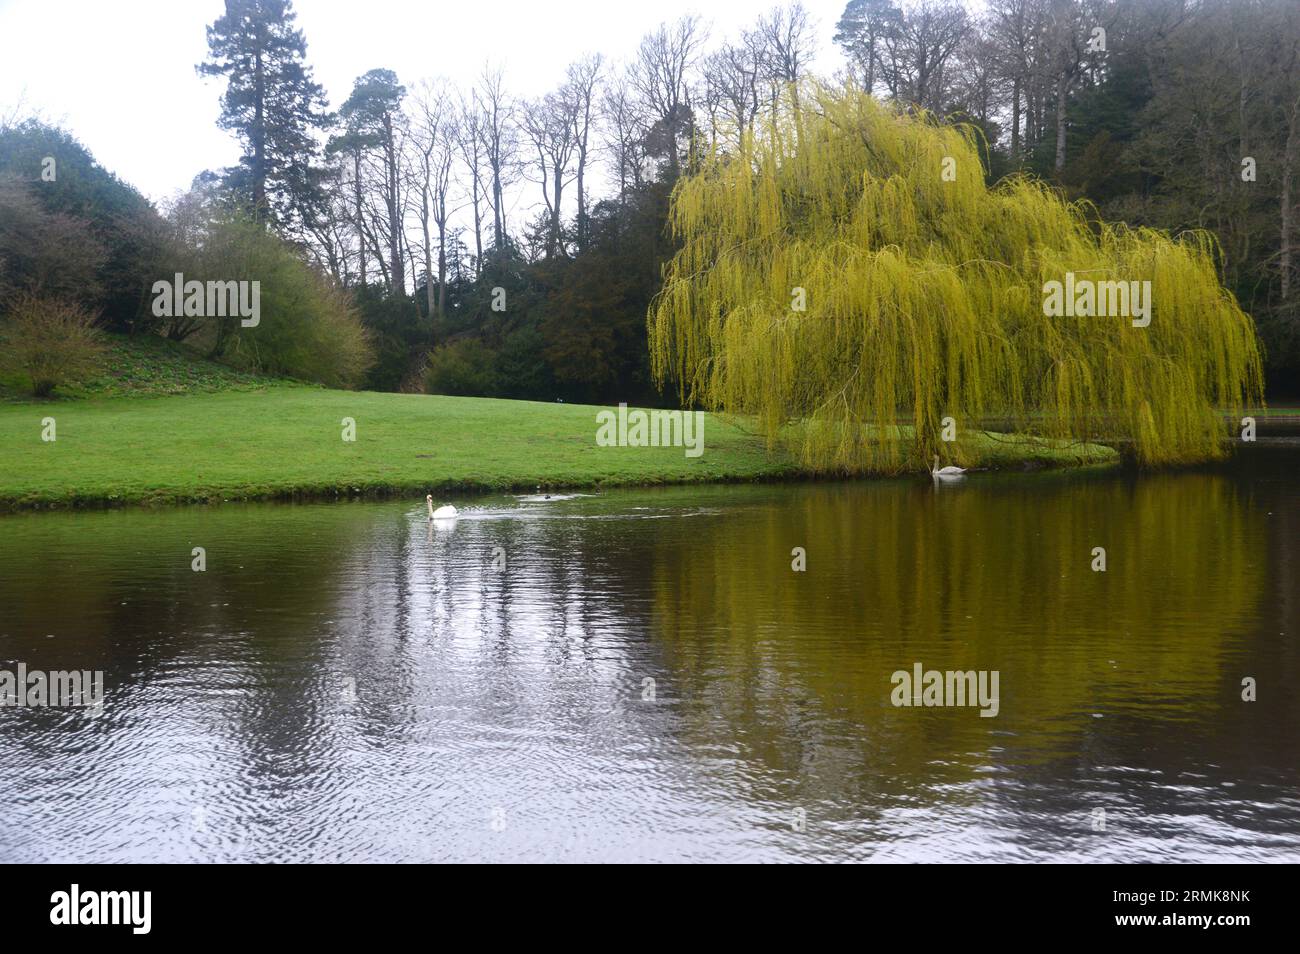 Reflections of a Weeping Willow Tree and Swan on the River Skell at Fountains Abbey and Studley Royal Water Garden, North Yorkshire, England, UK. Stock Photo